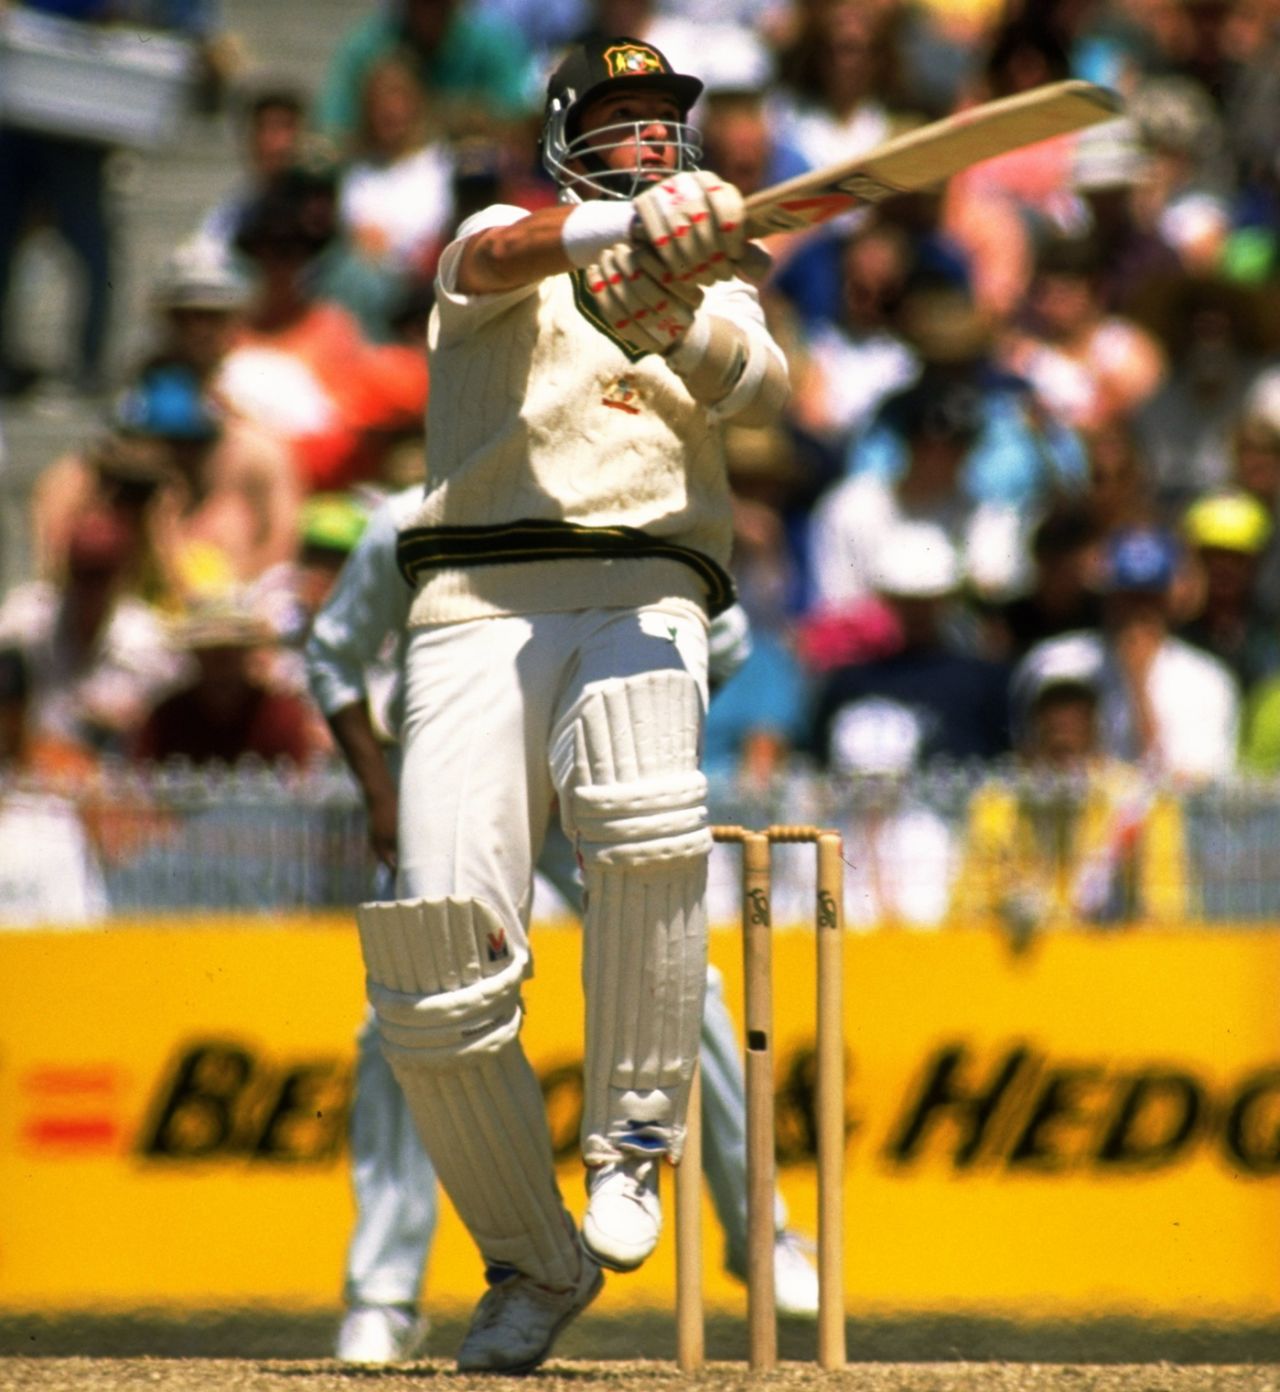 Mark Waugh pulls on his way to a hundred, Australia v West Indies, 2nd Test, Melbourne, 1st day, December 26, 1992